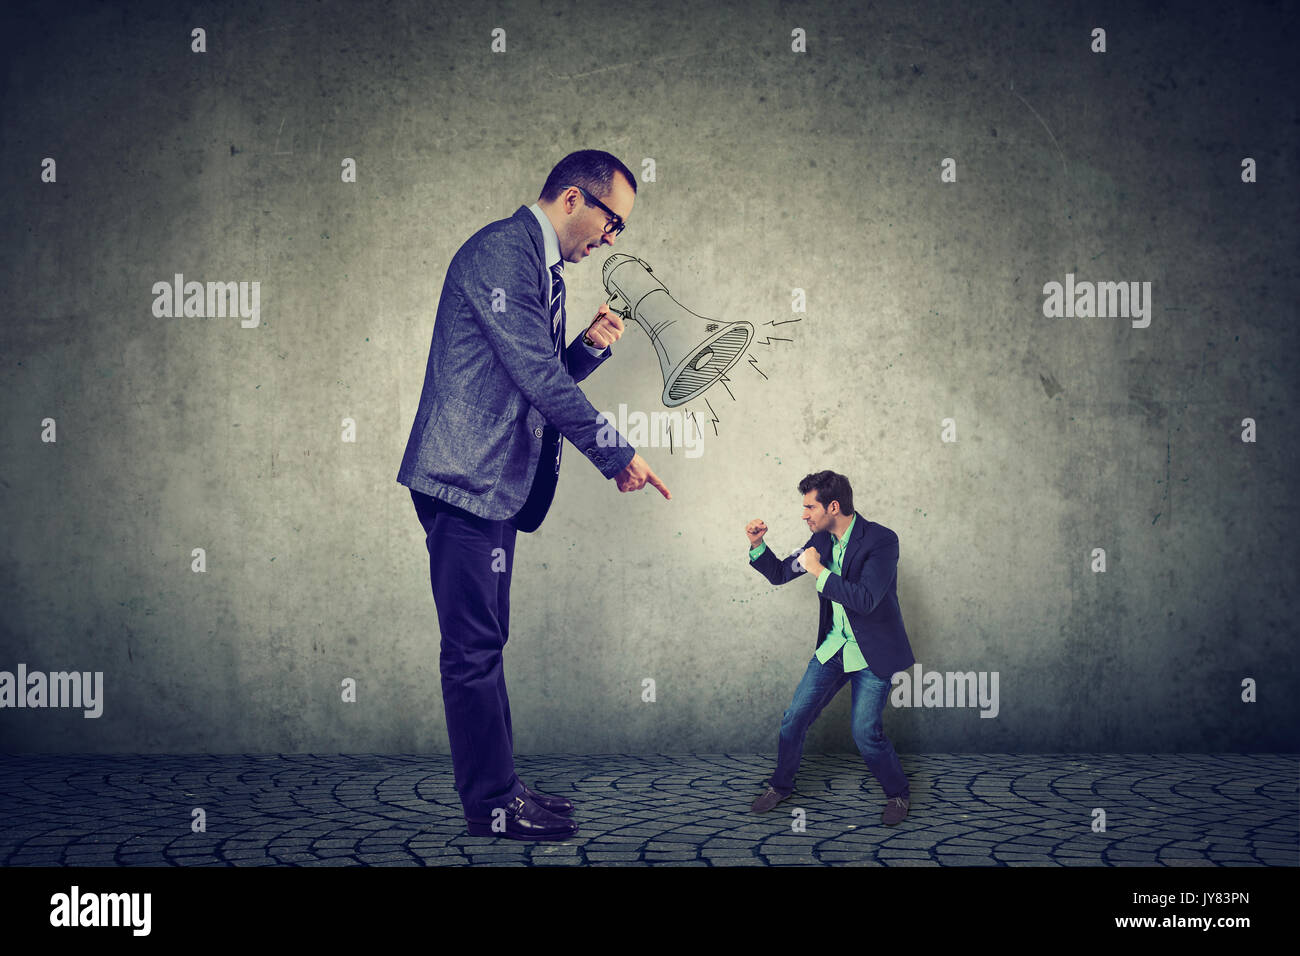 Man fighting against his big angry boss standing by gray wall background Stock Photo